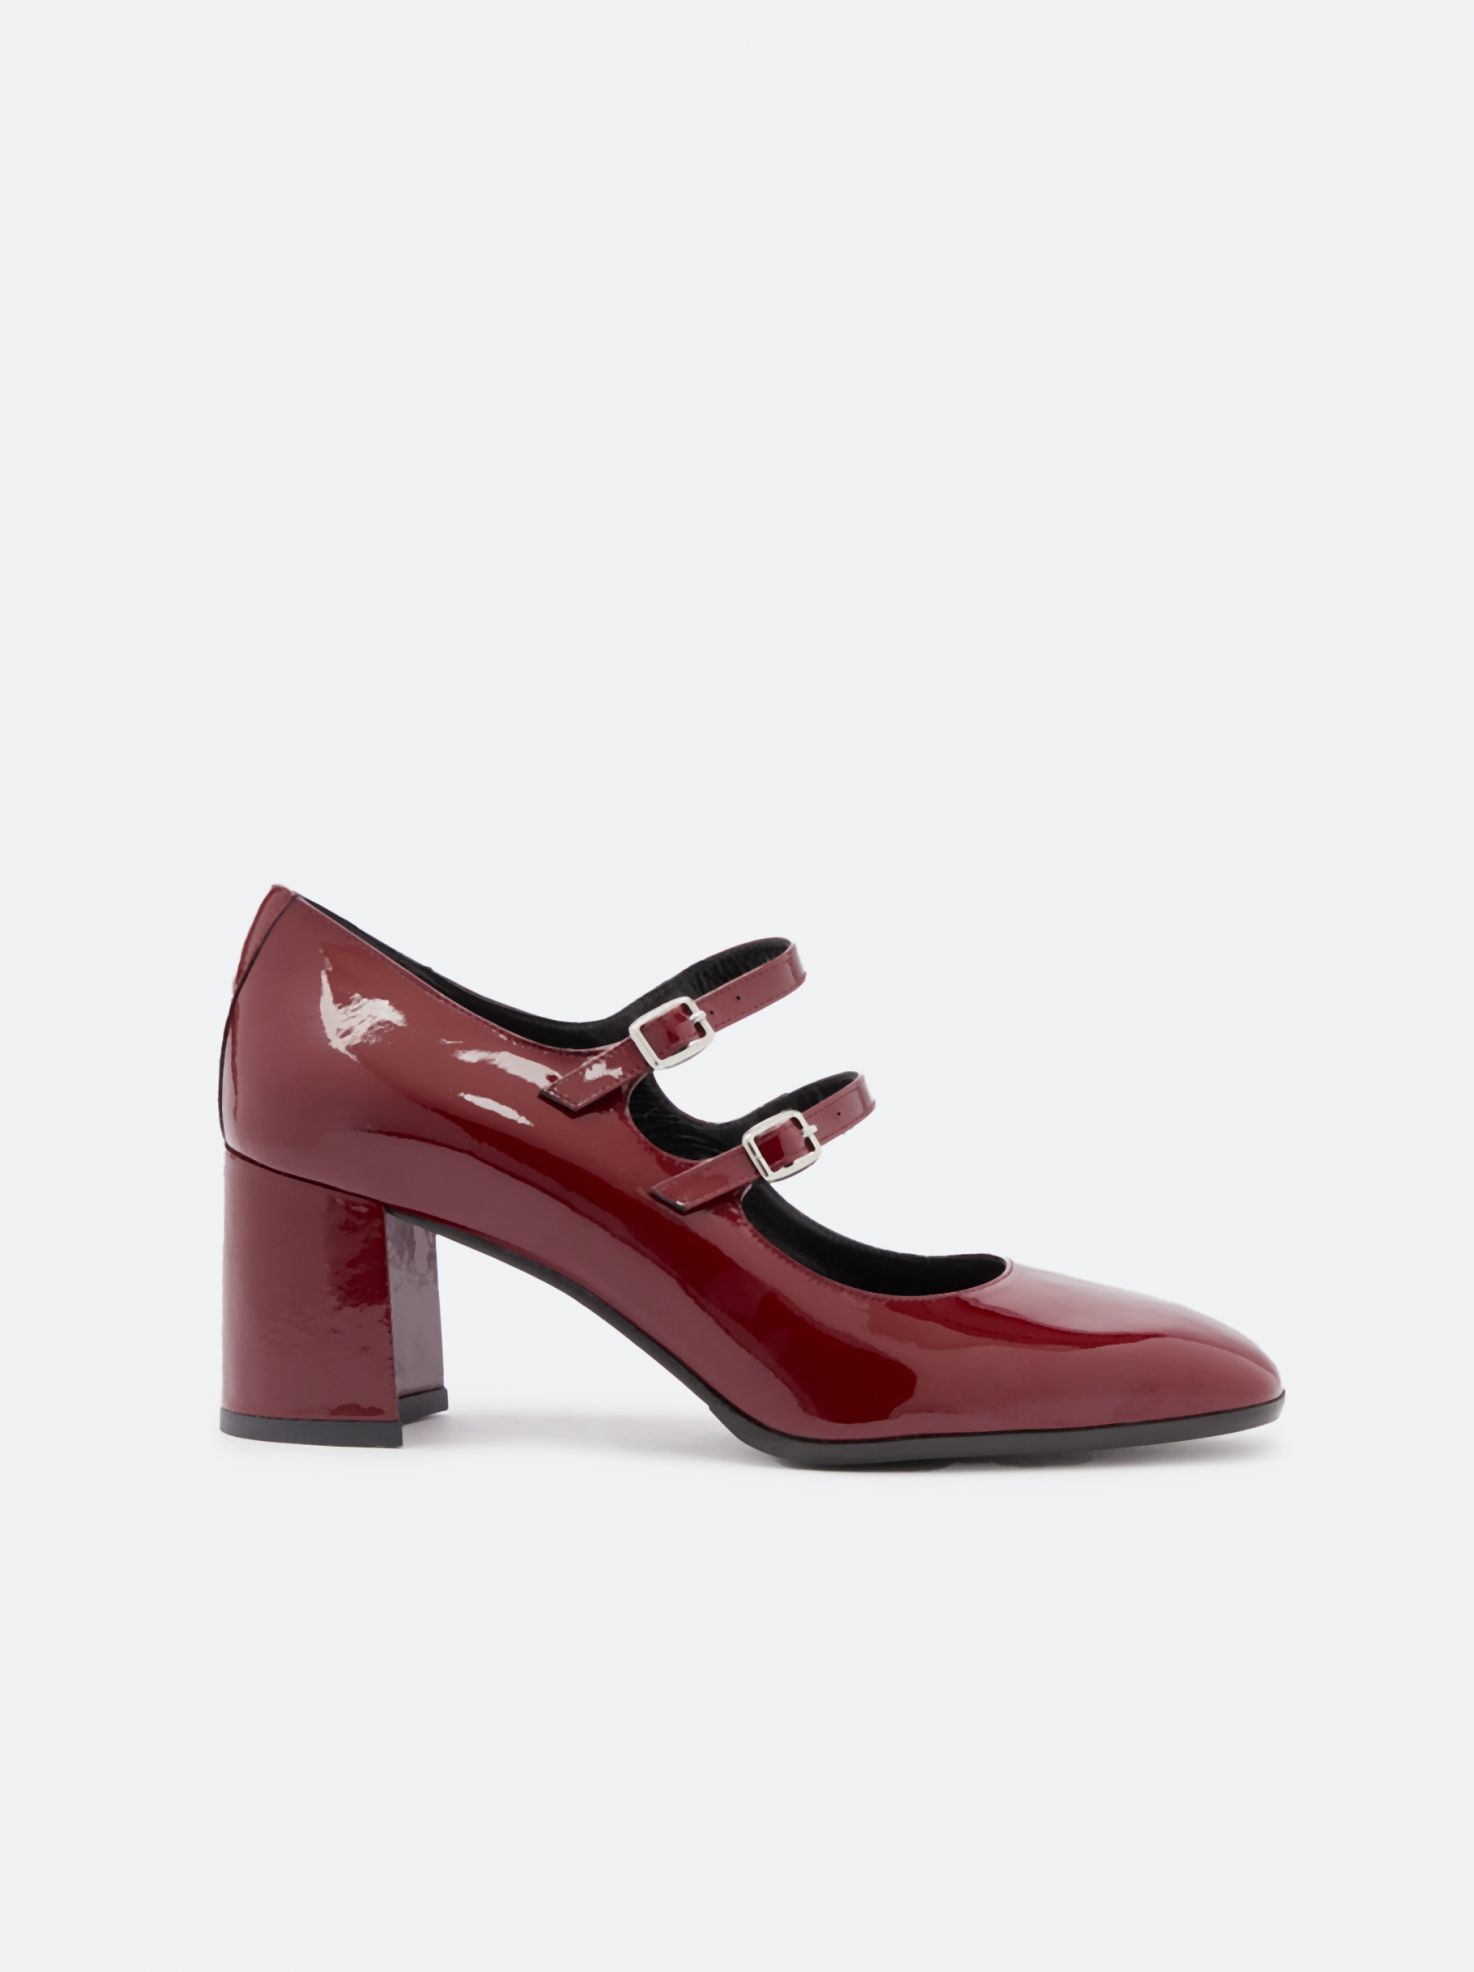 BLOCK HEEL FAUX PATENT FINISH SHOES - Red